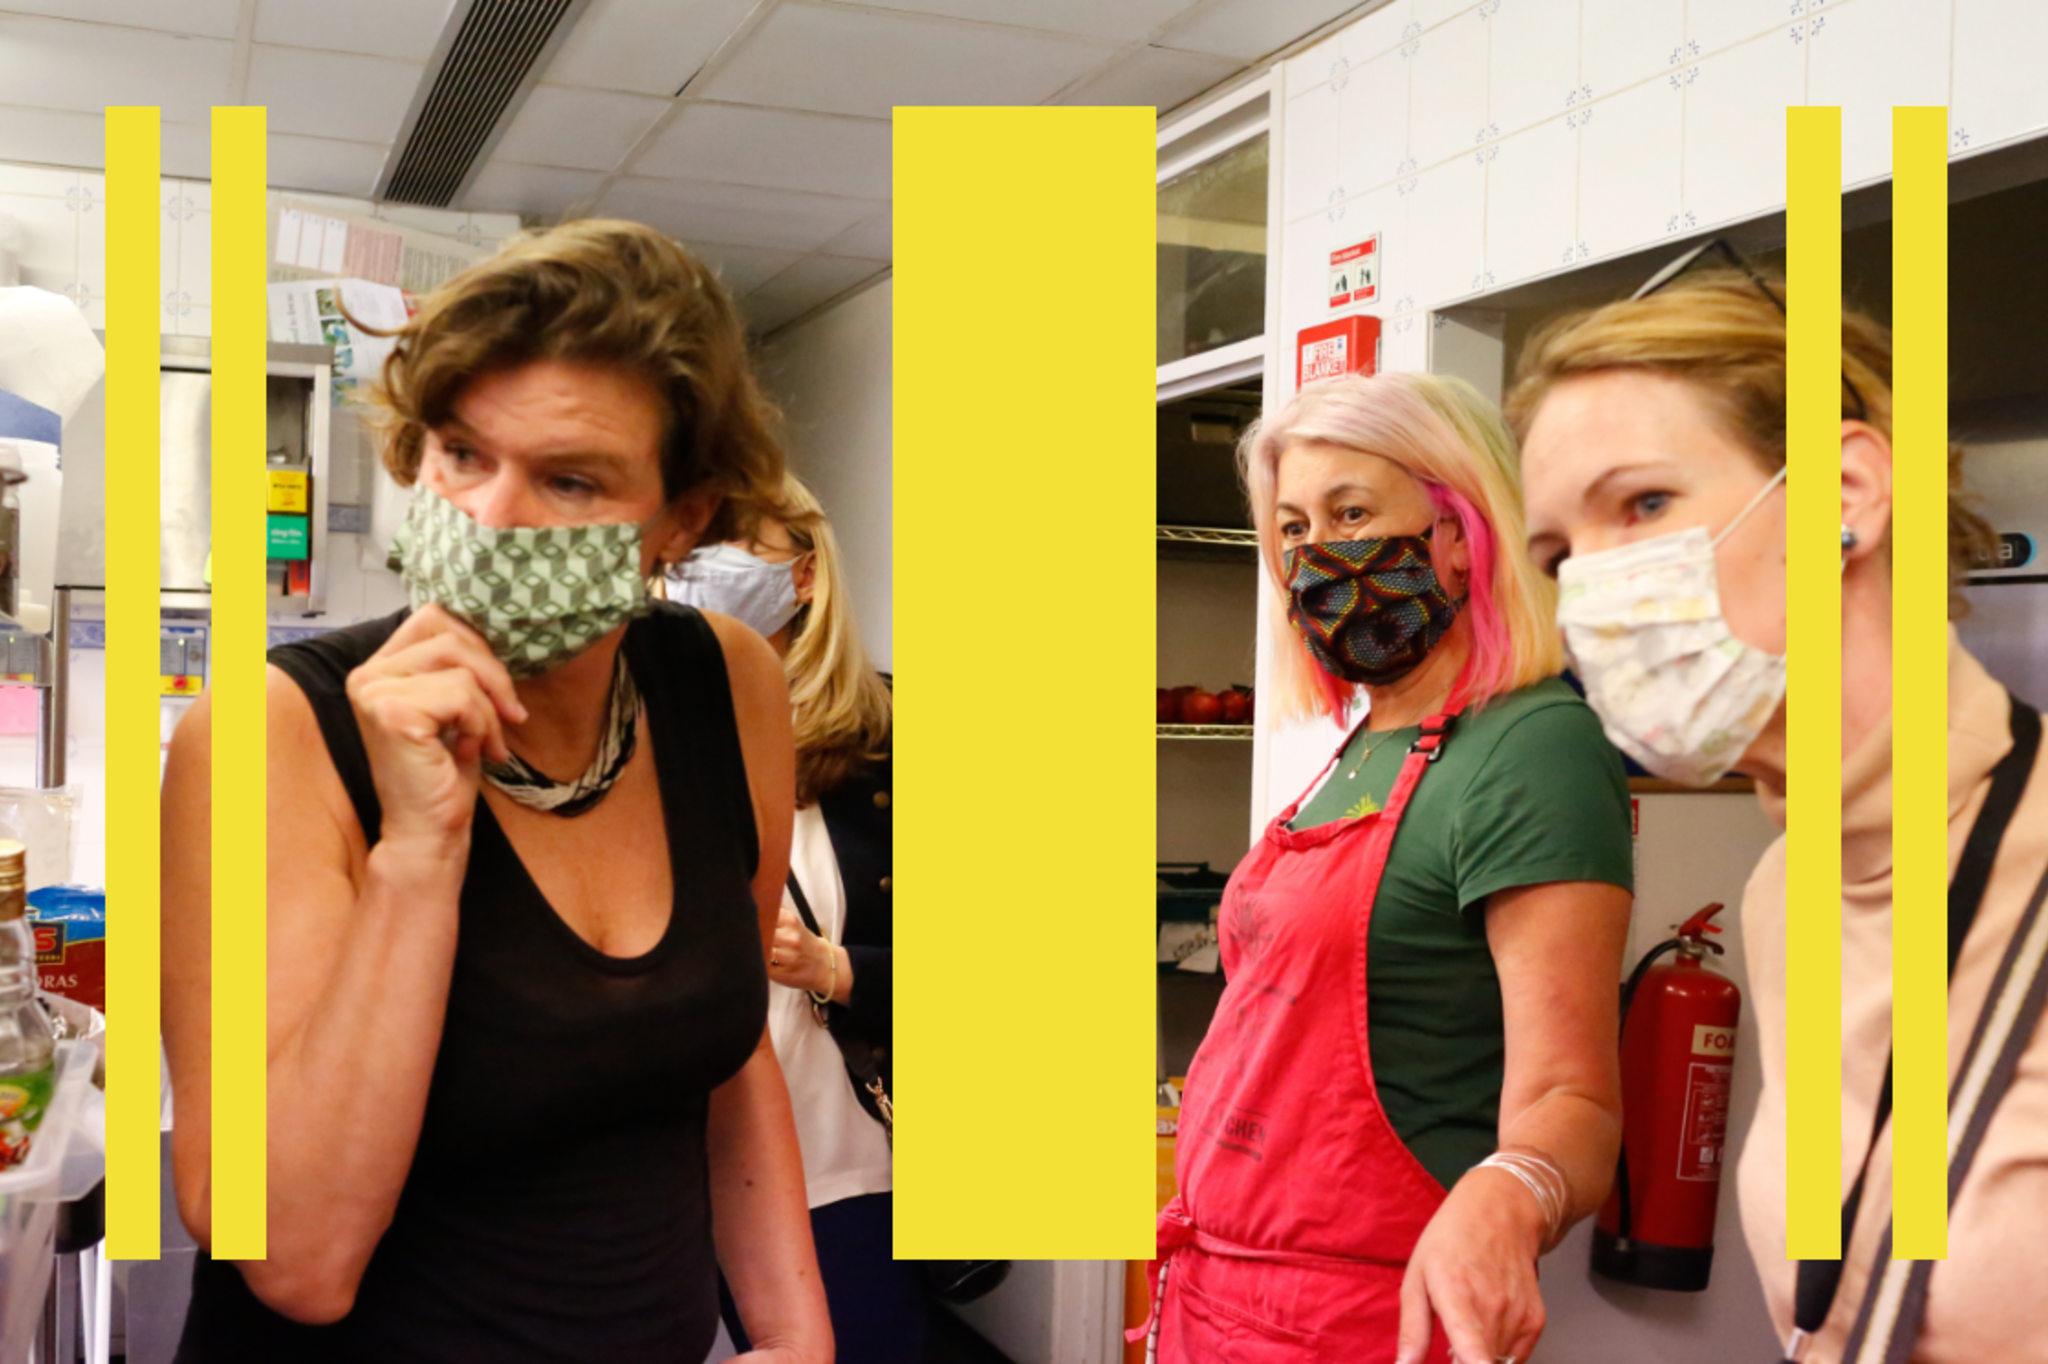  Mariana Mazzucato in a kitchen with two other women, all are wearing facemasks